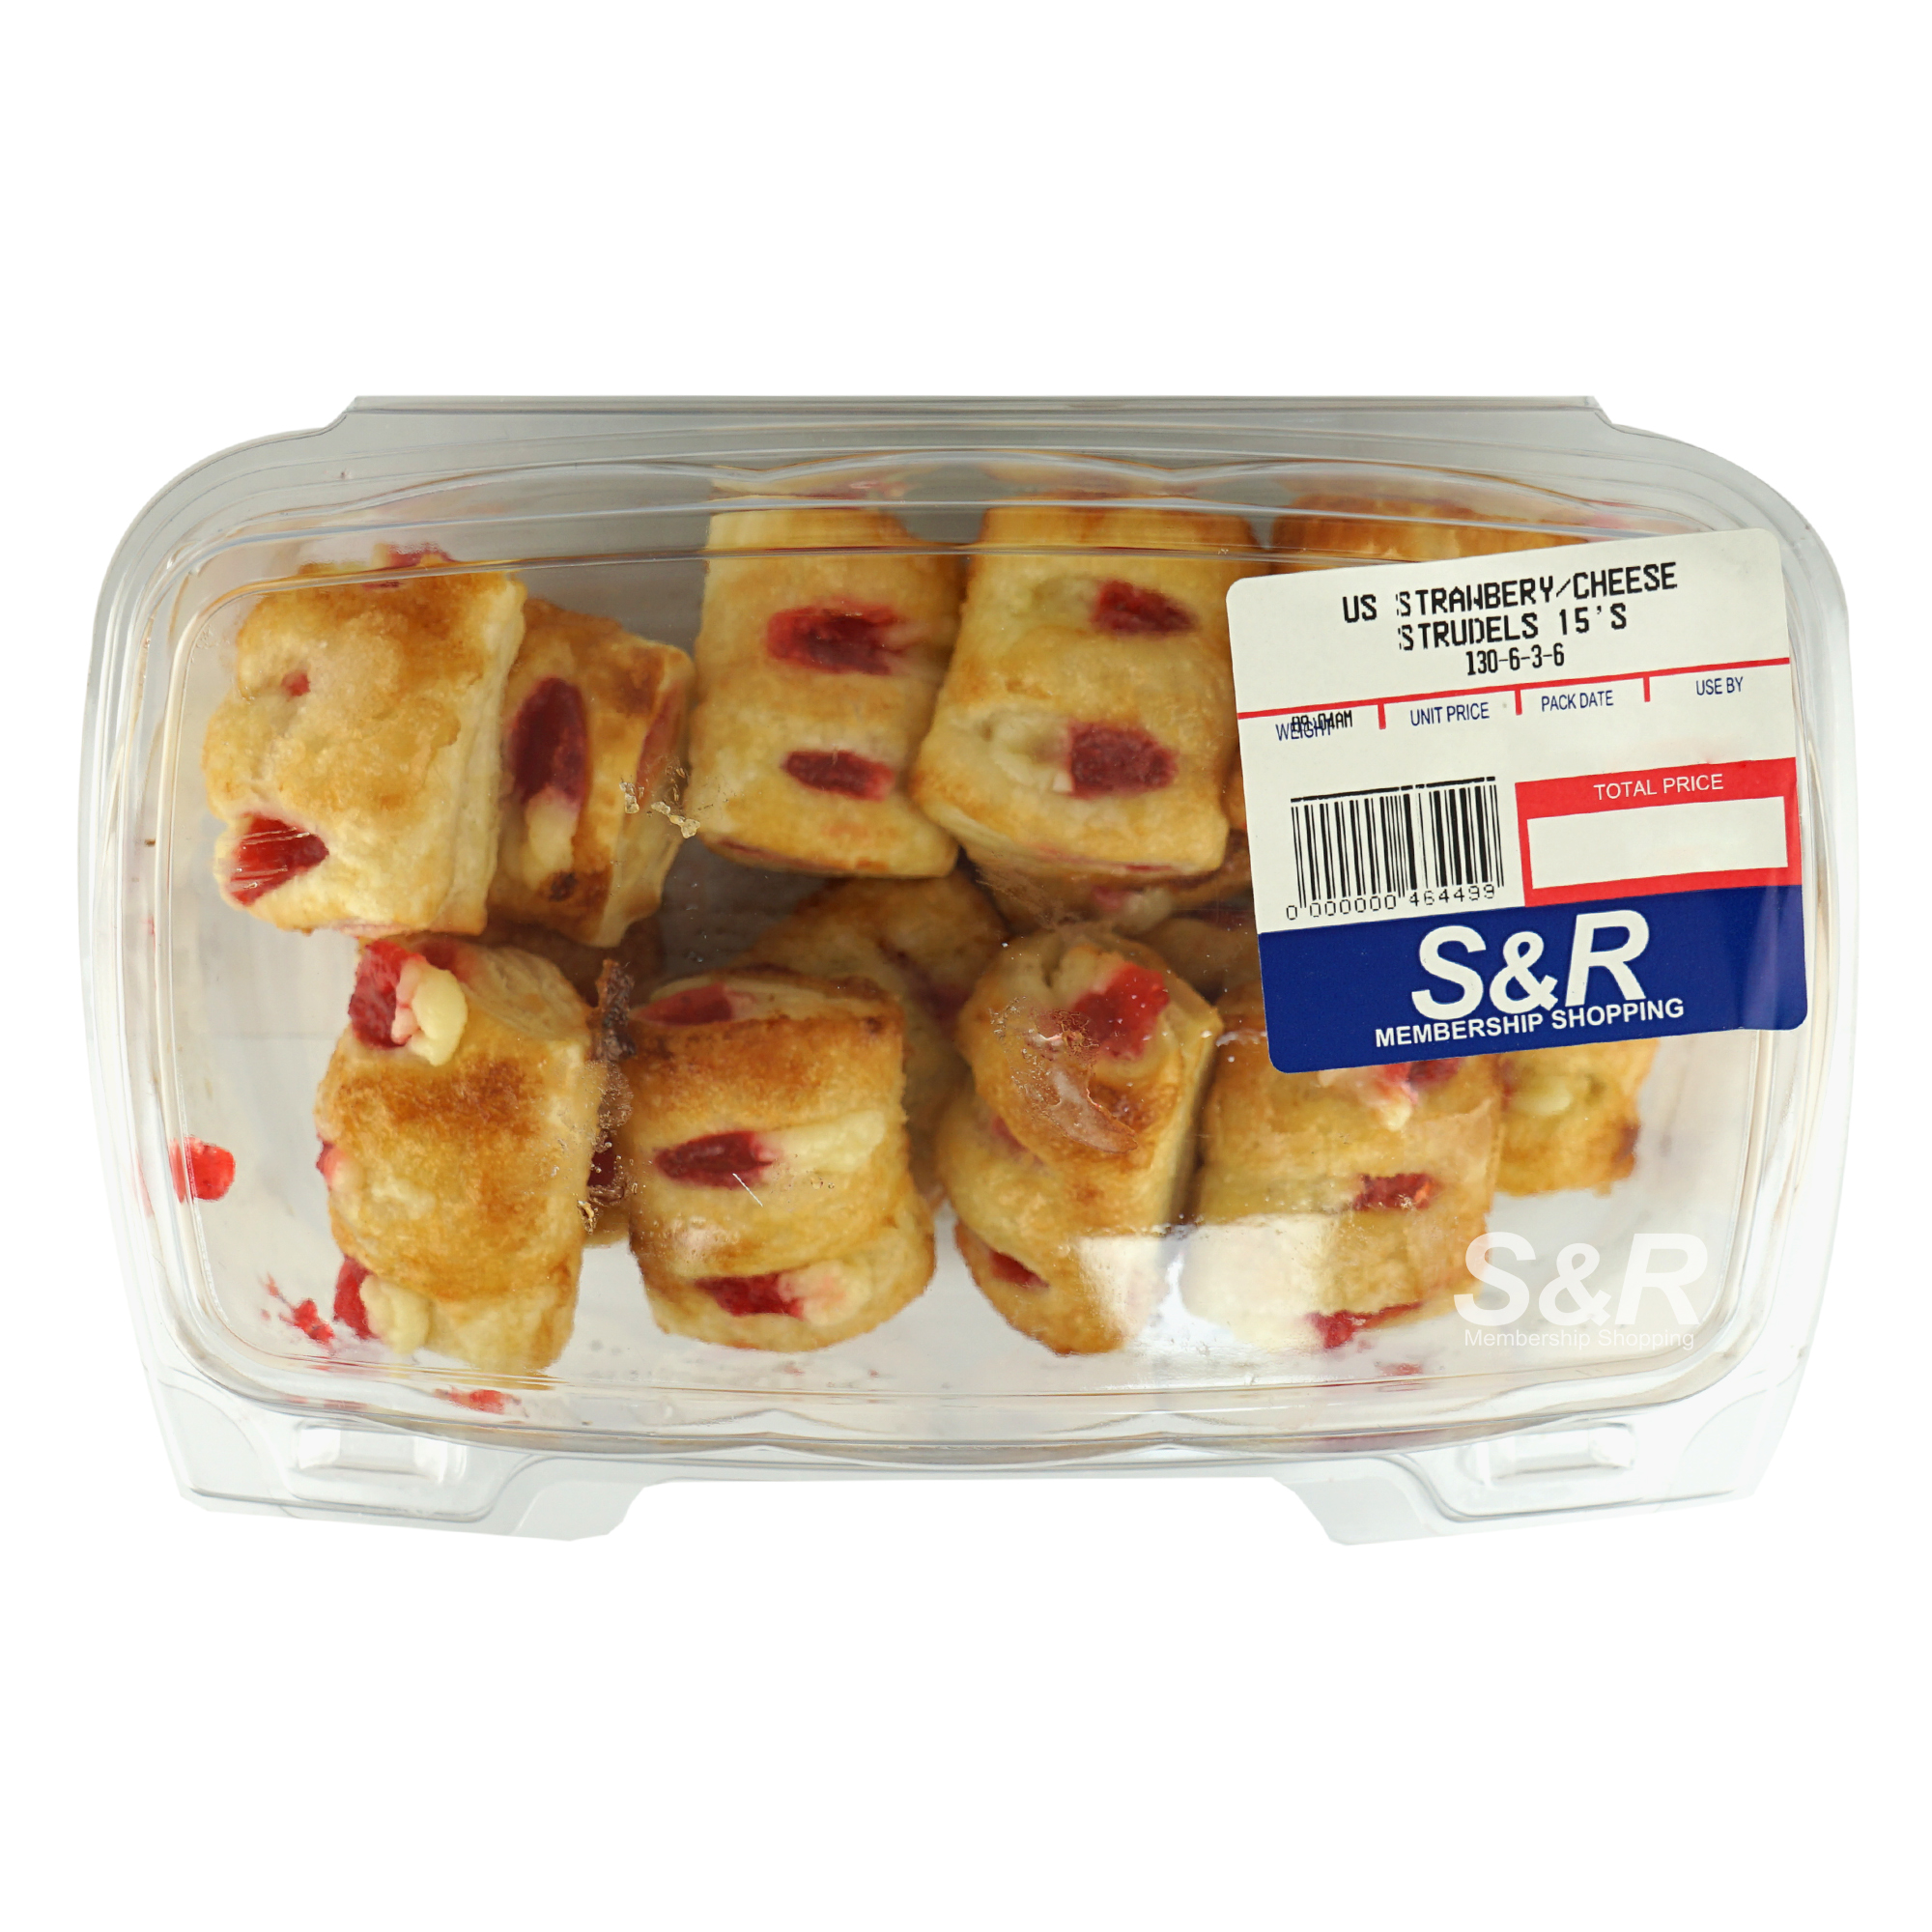 S&R US Strawberry and Cheese Strudels 15pcs